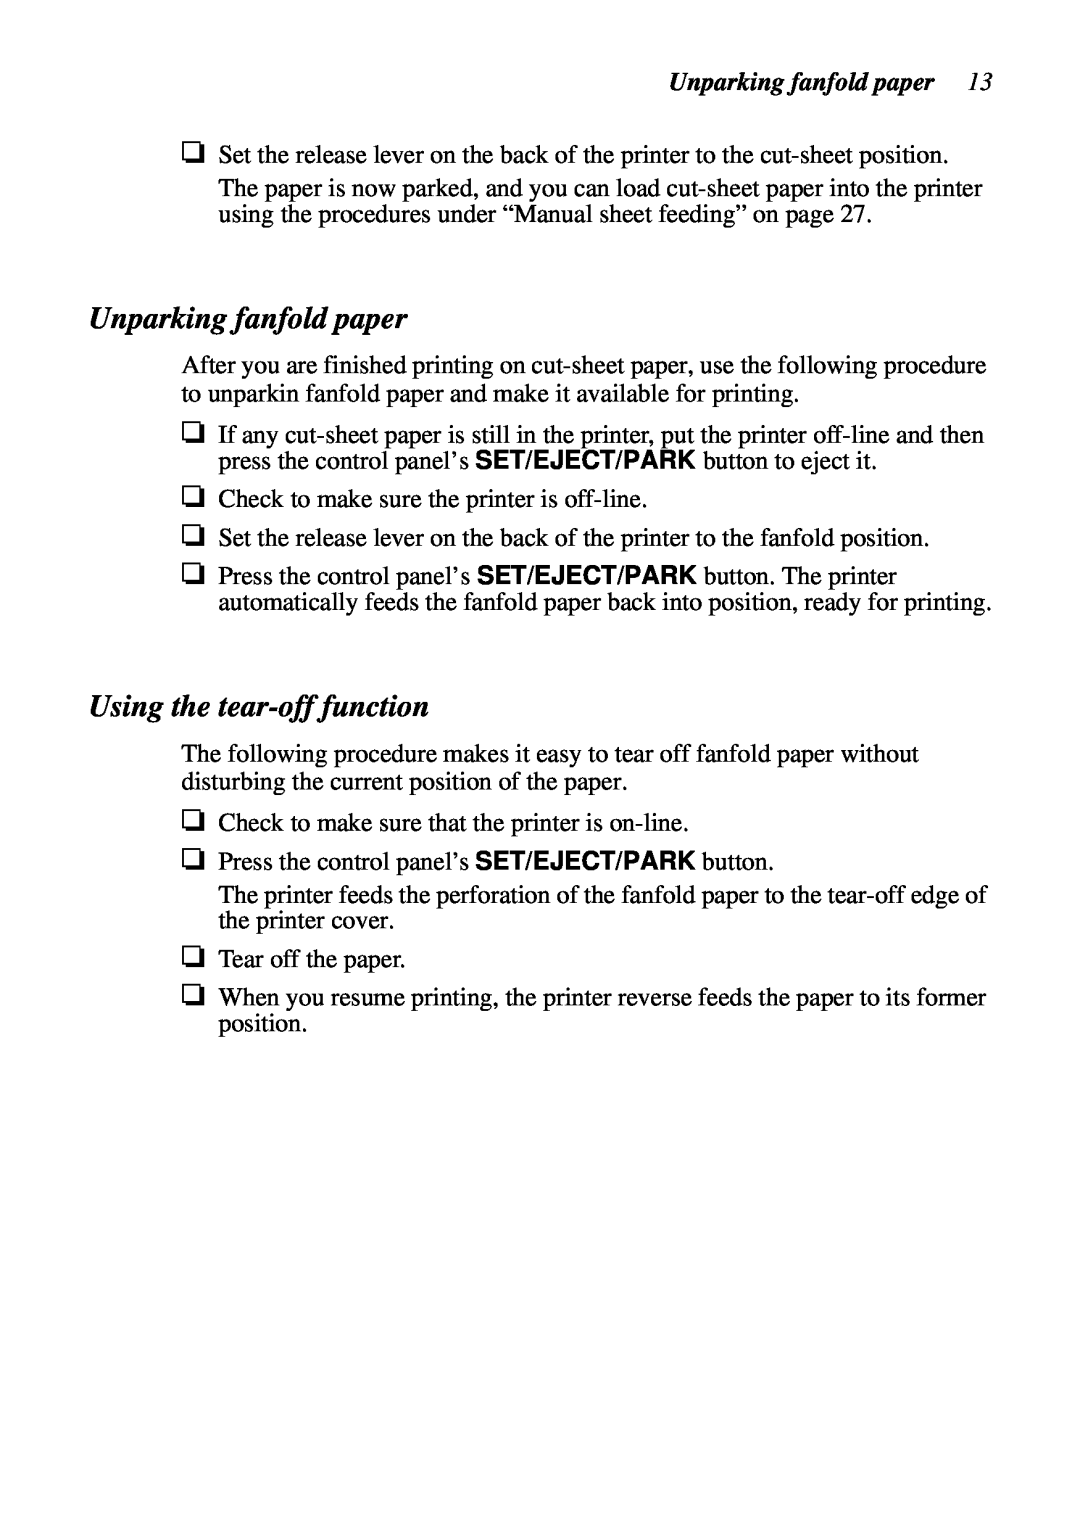 Star Micronics LC-6211 user manual Unparking fanfold paper, Using the tear-off function 